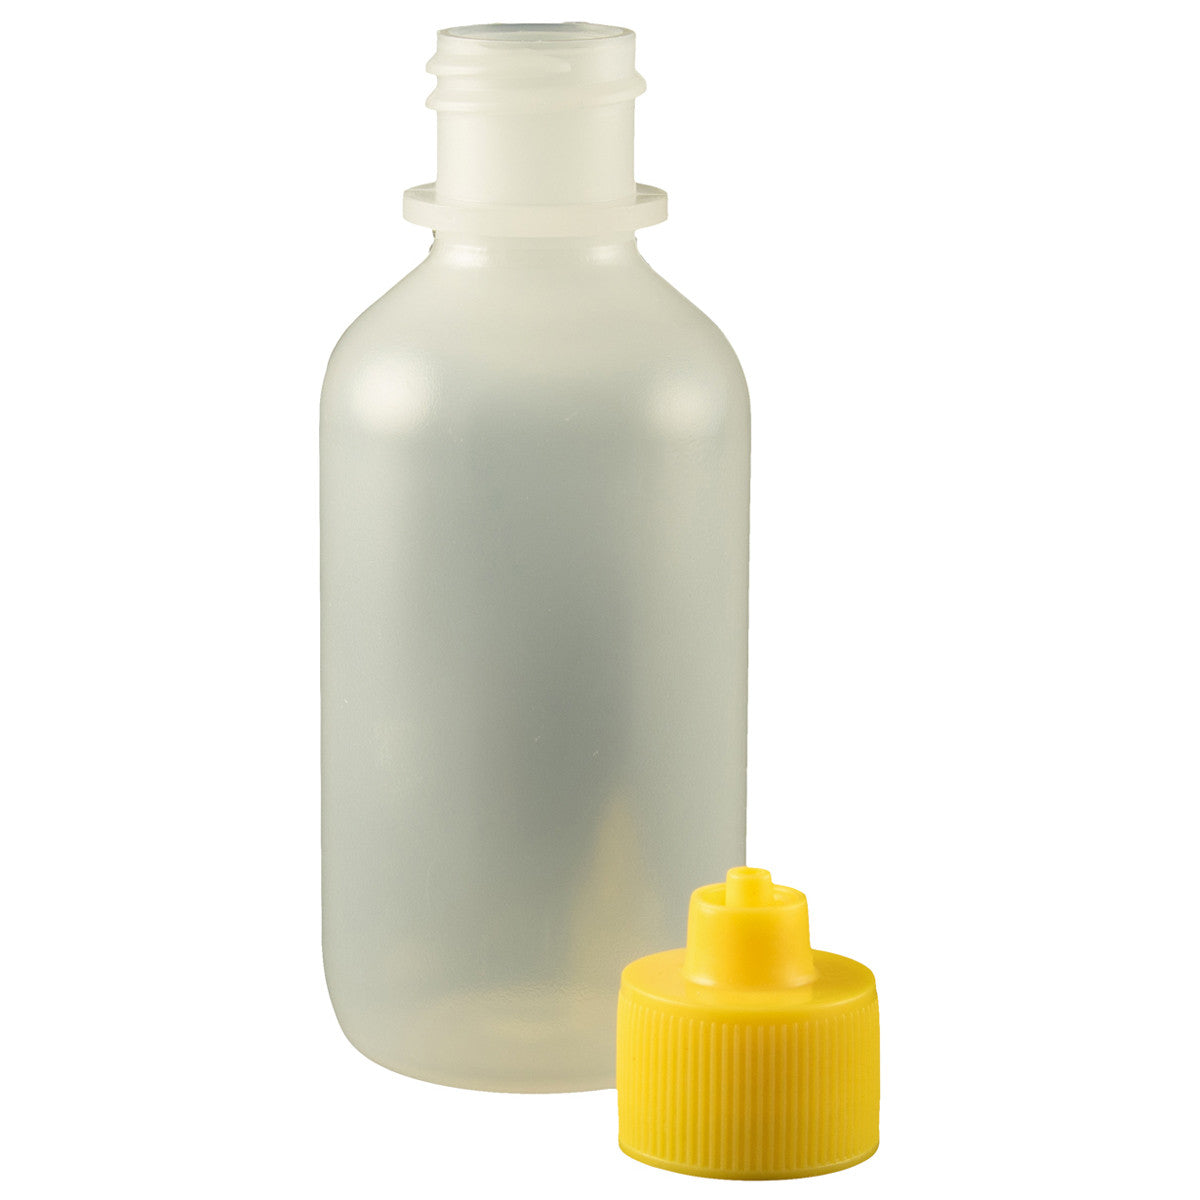 1/2 oz Natural LDPE Boston Round Bottles w/ Spout and Red Tip Cap